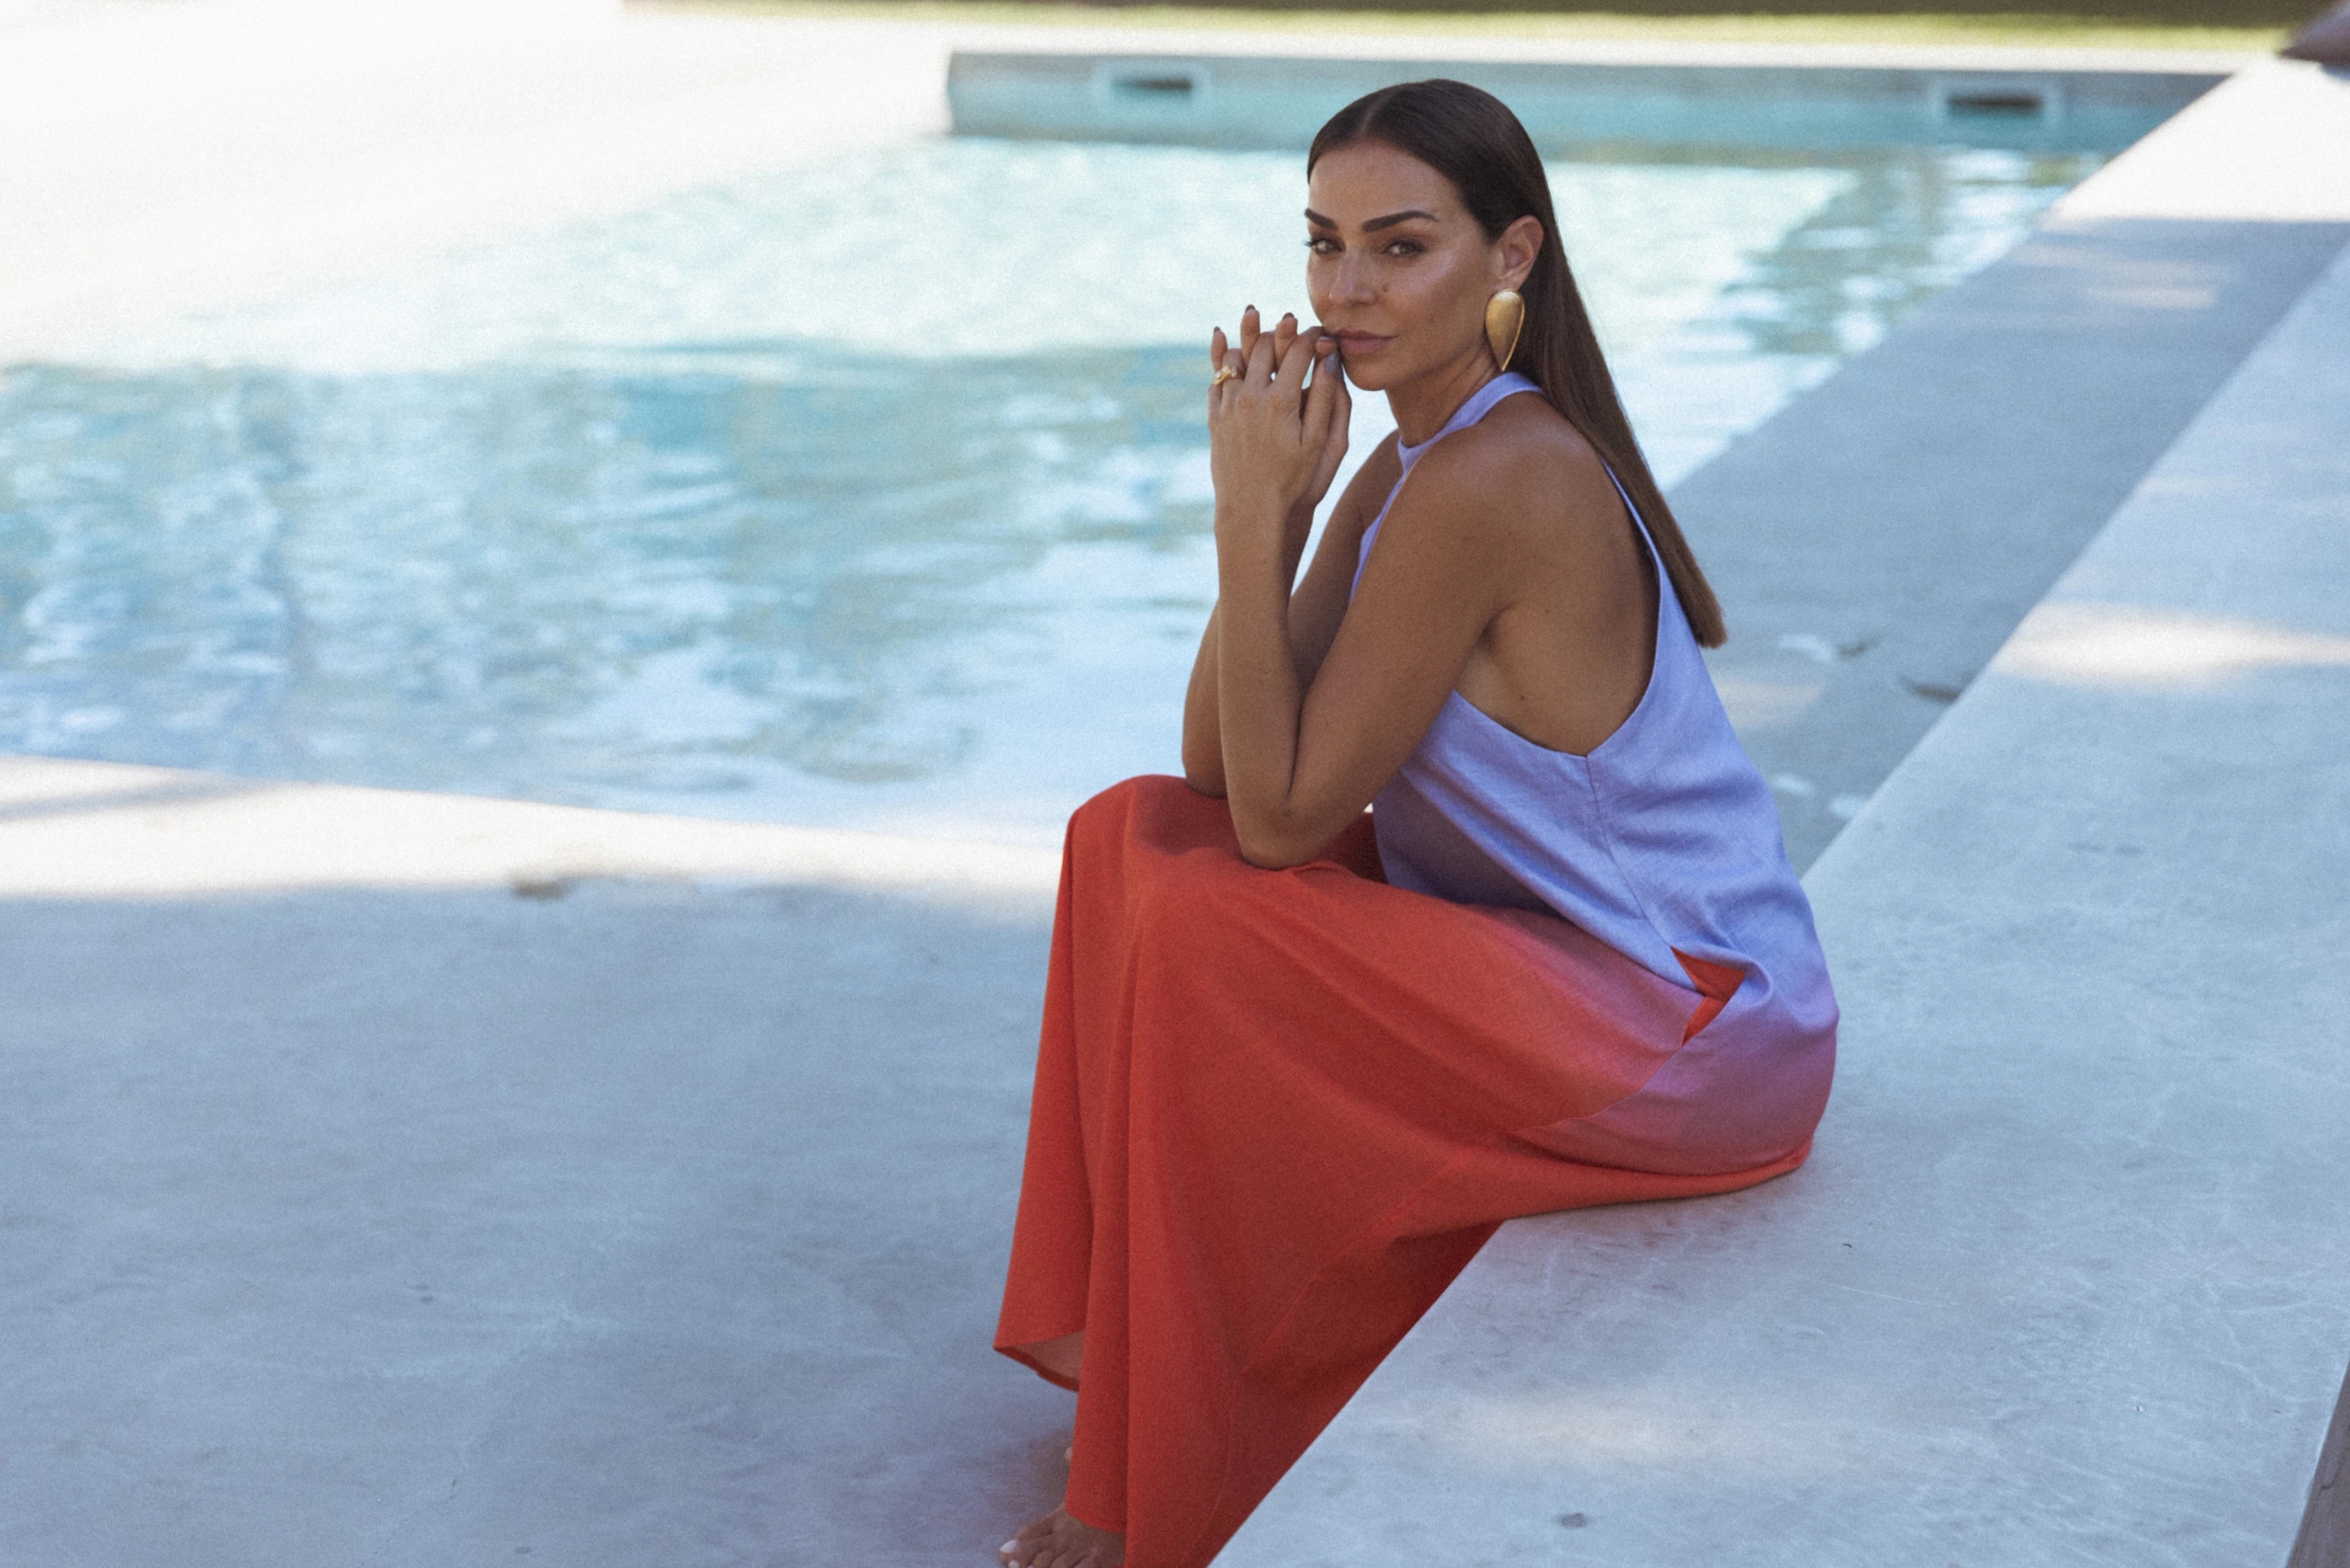 Vanessa Martins brings summer sophistication in a pink-orange gradient dress, posing for SIENNA INSPO's summer fashion photoshoot.